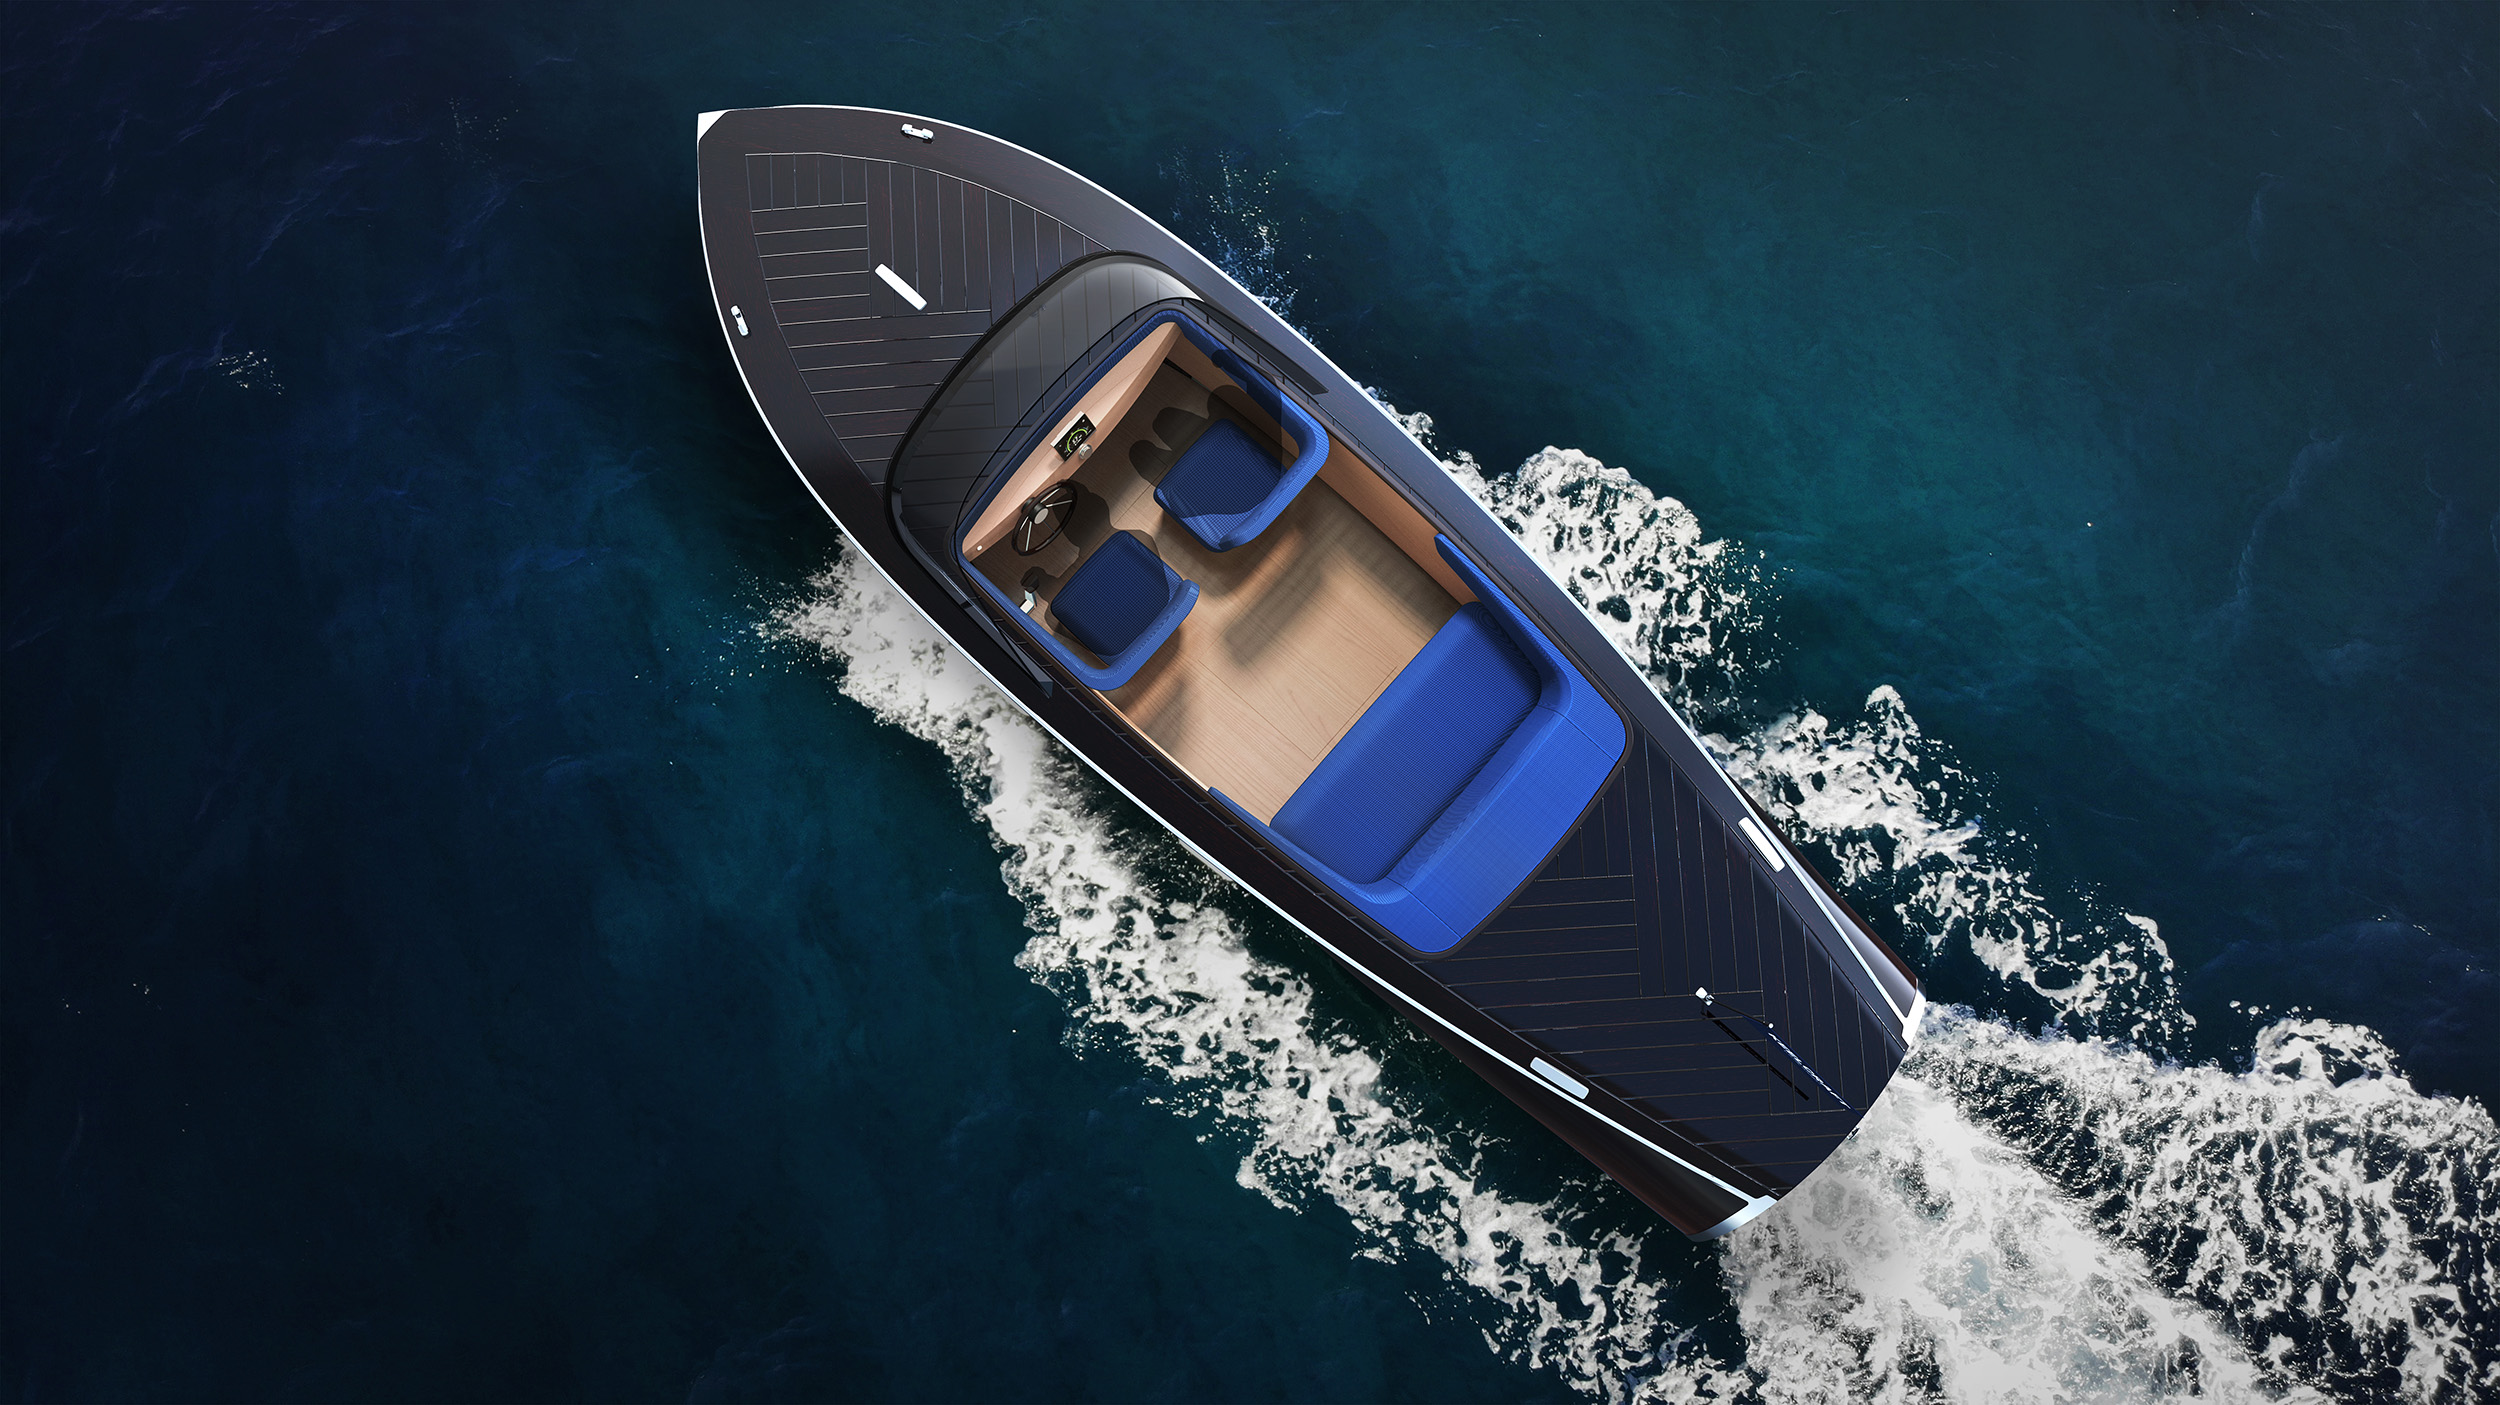 KeelCraft electric runabout top view on the water